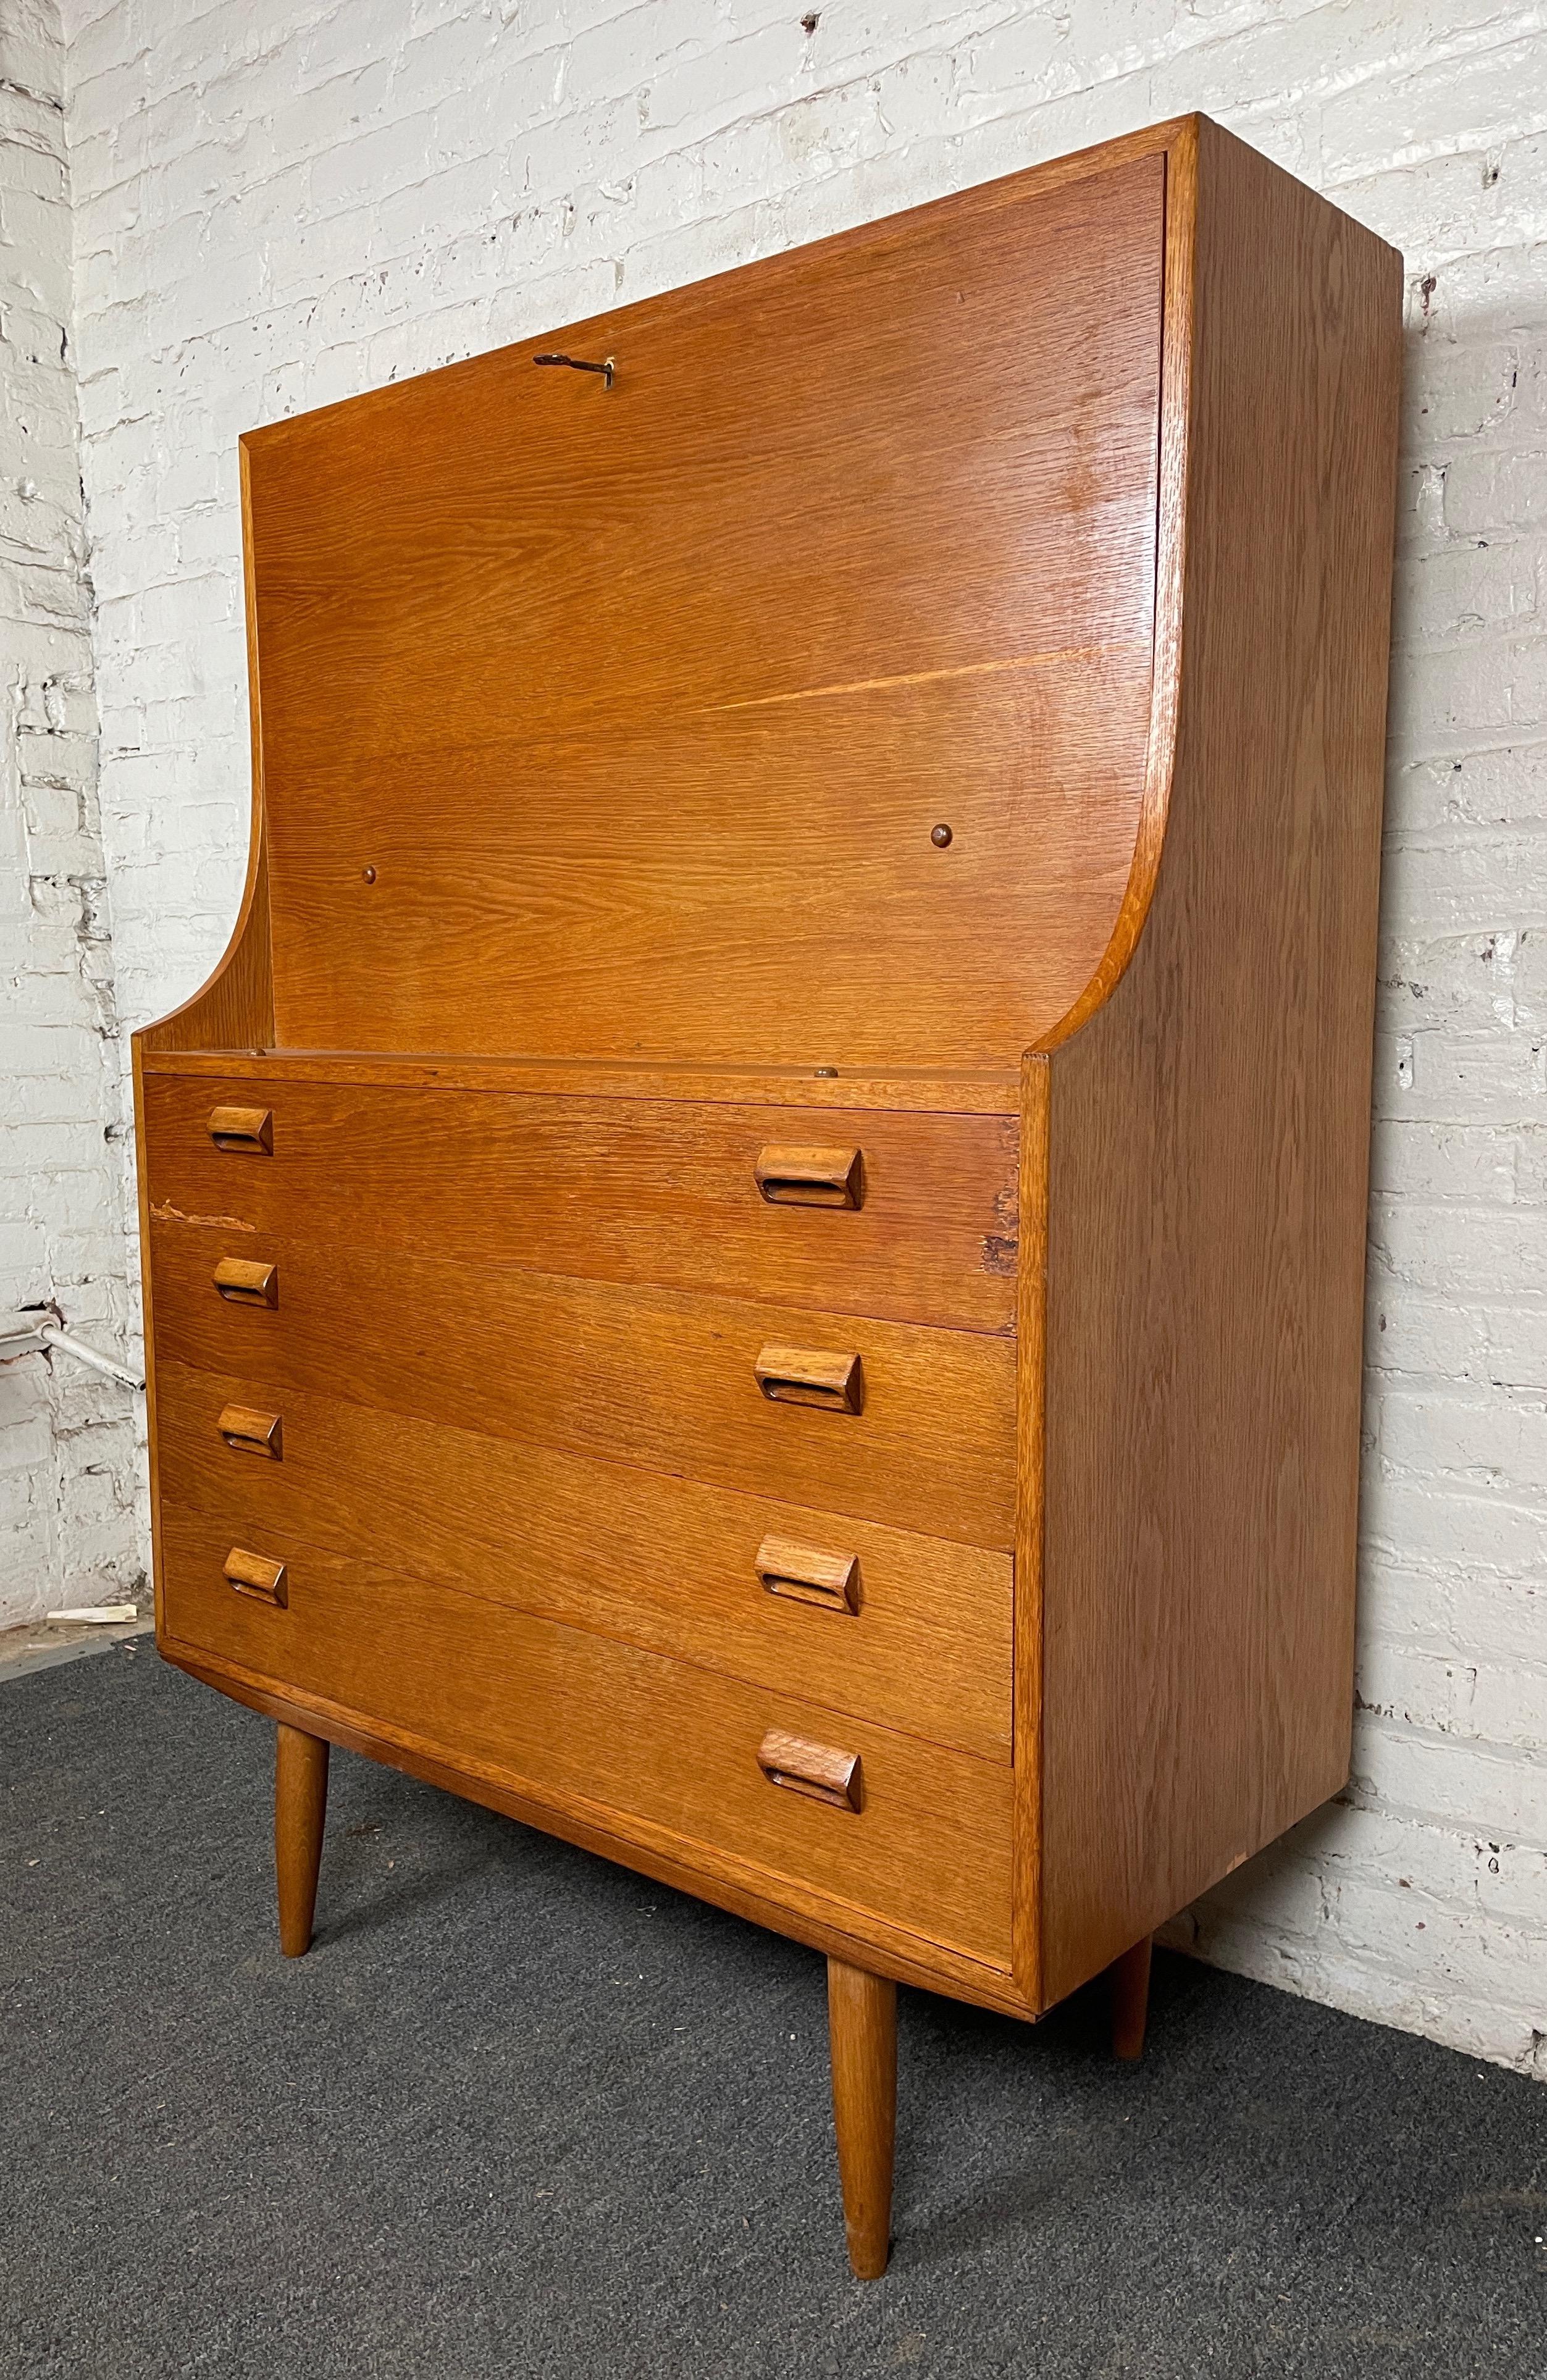 Beautiful vintage modern teak secretary desk from Denmark. The desk features four spacious drawers with sculpted wood handles. Pull on the key to fold down the desk revealing the beautiful workspace, complete with two dovetailed drawers and multiple